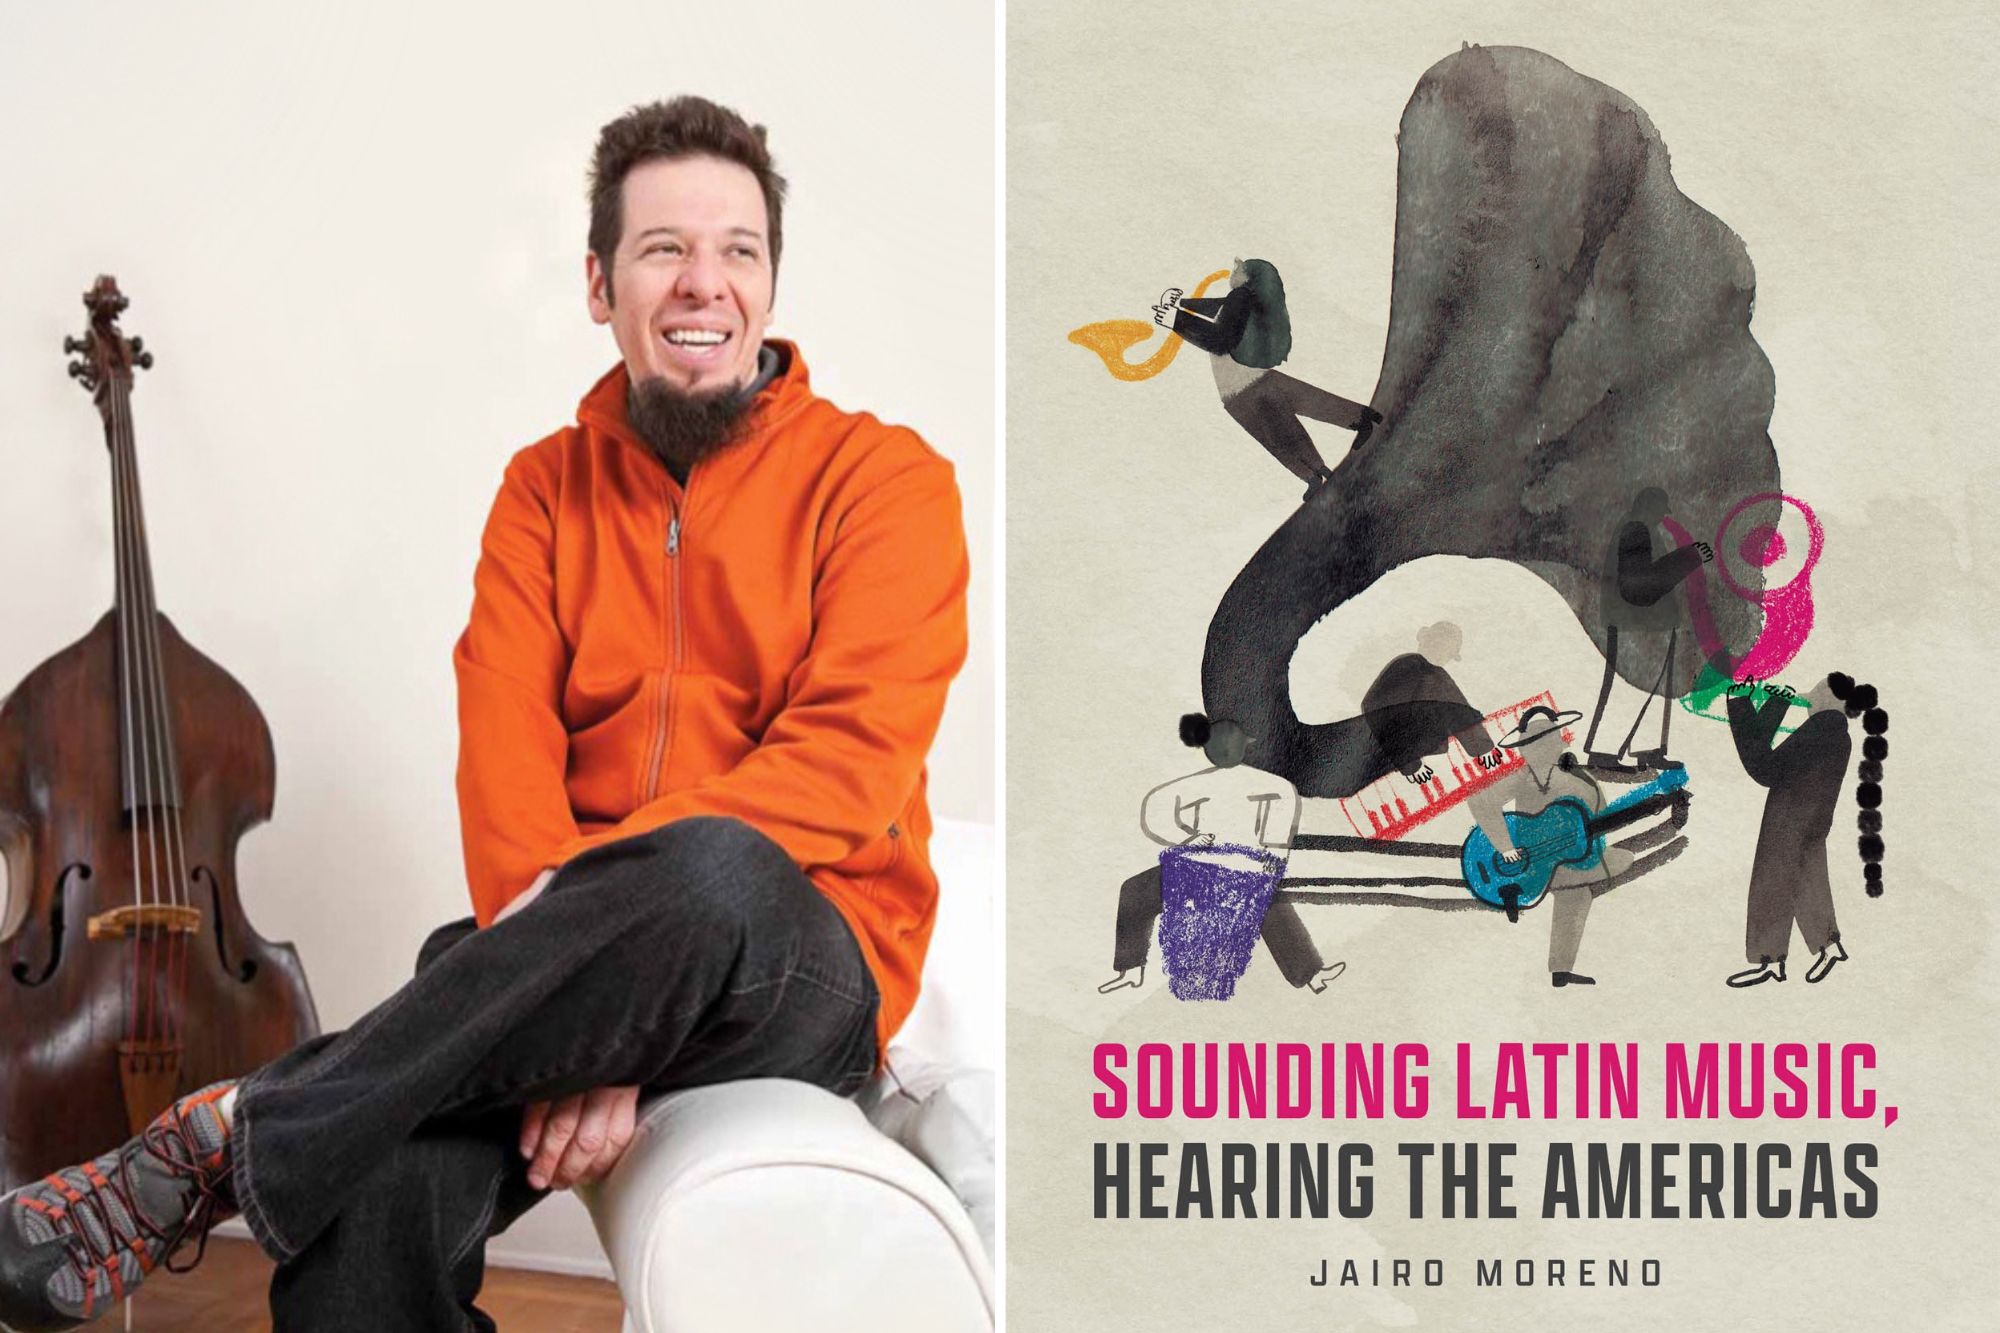 Jairo Moreno sits with a cello at left, at right is the book cover “Sounding Latin Music, Hearing the Americas.”